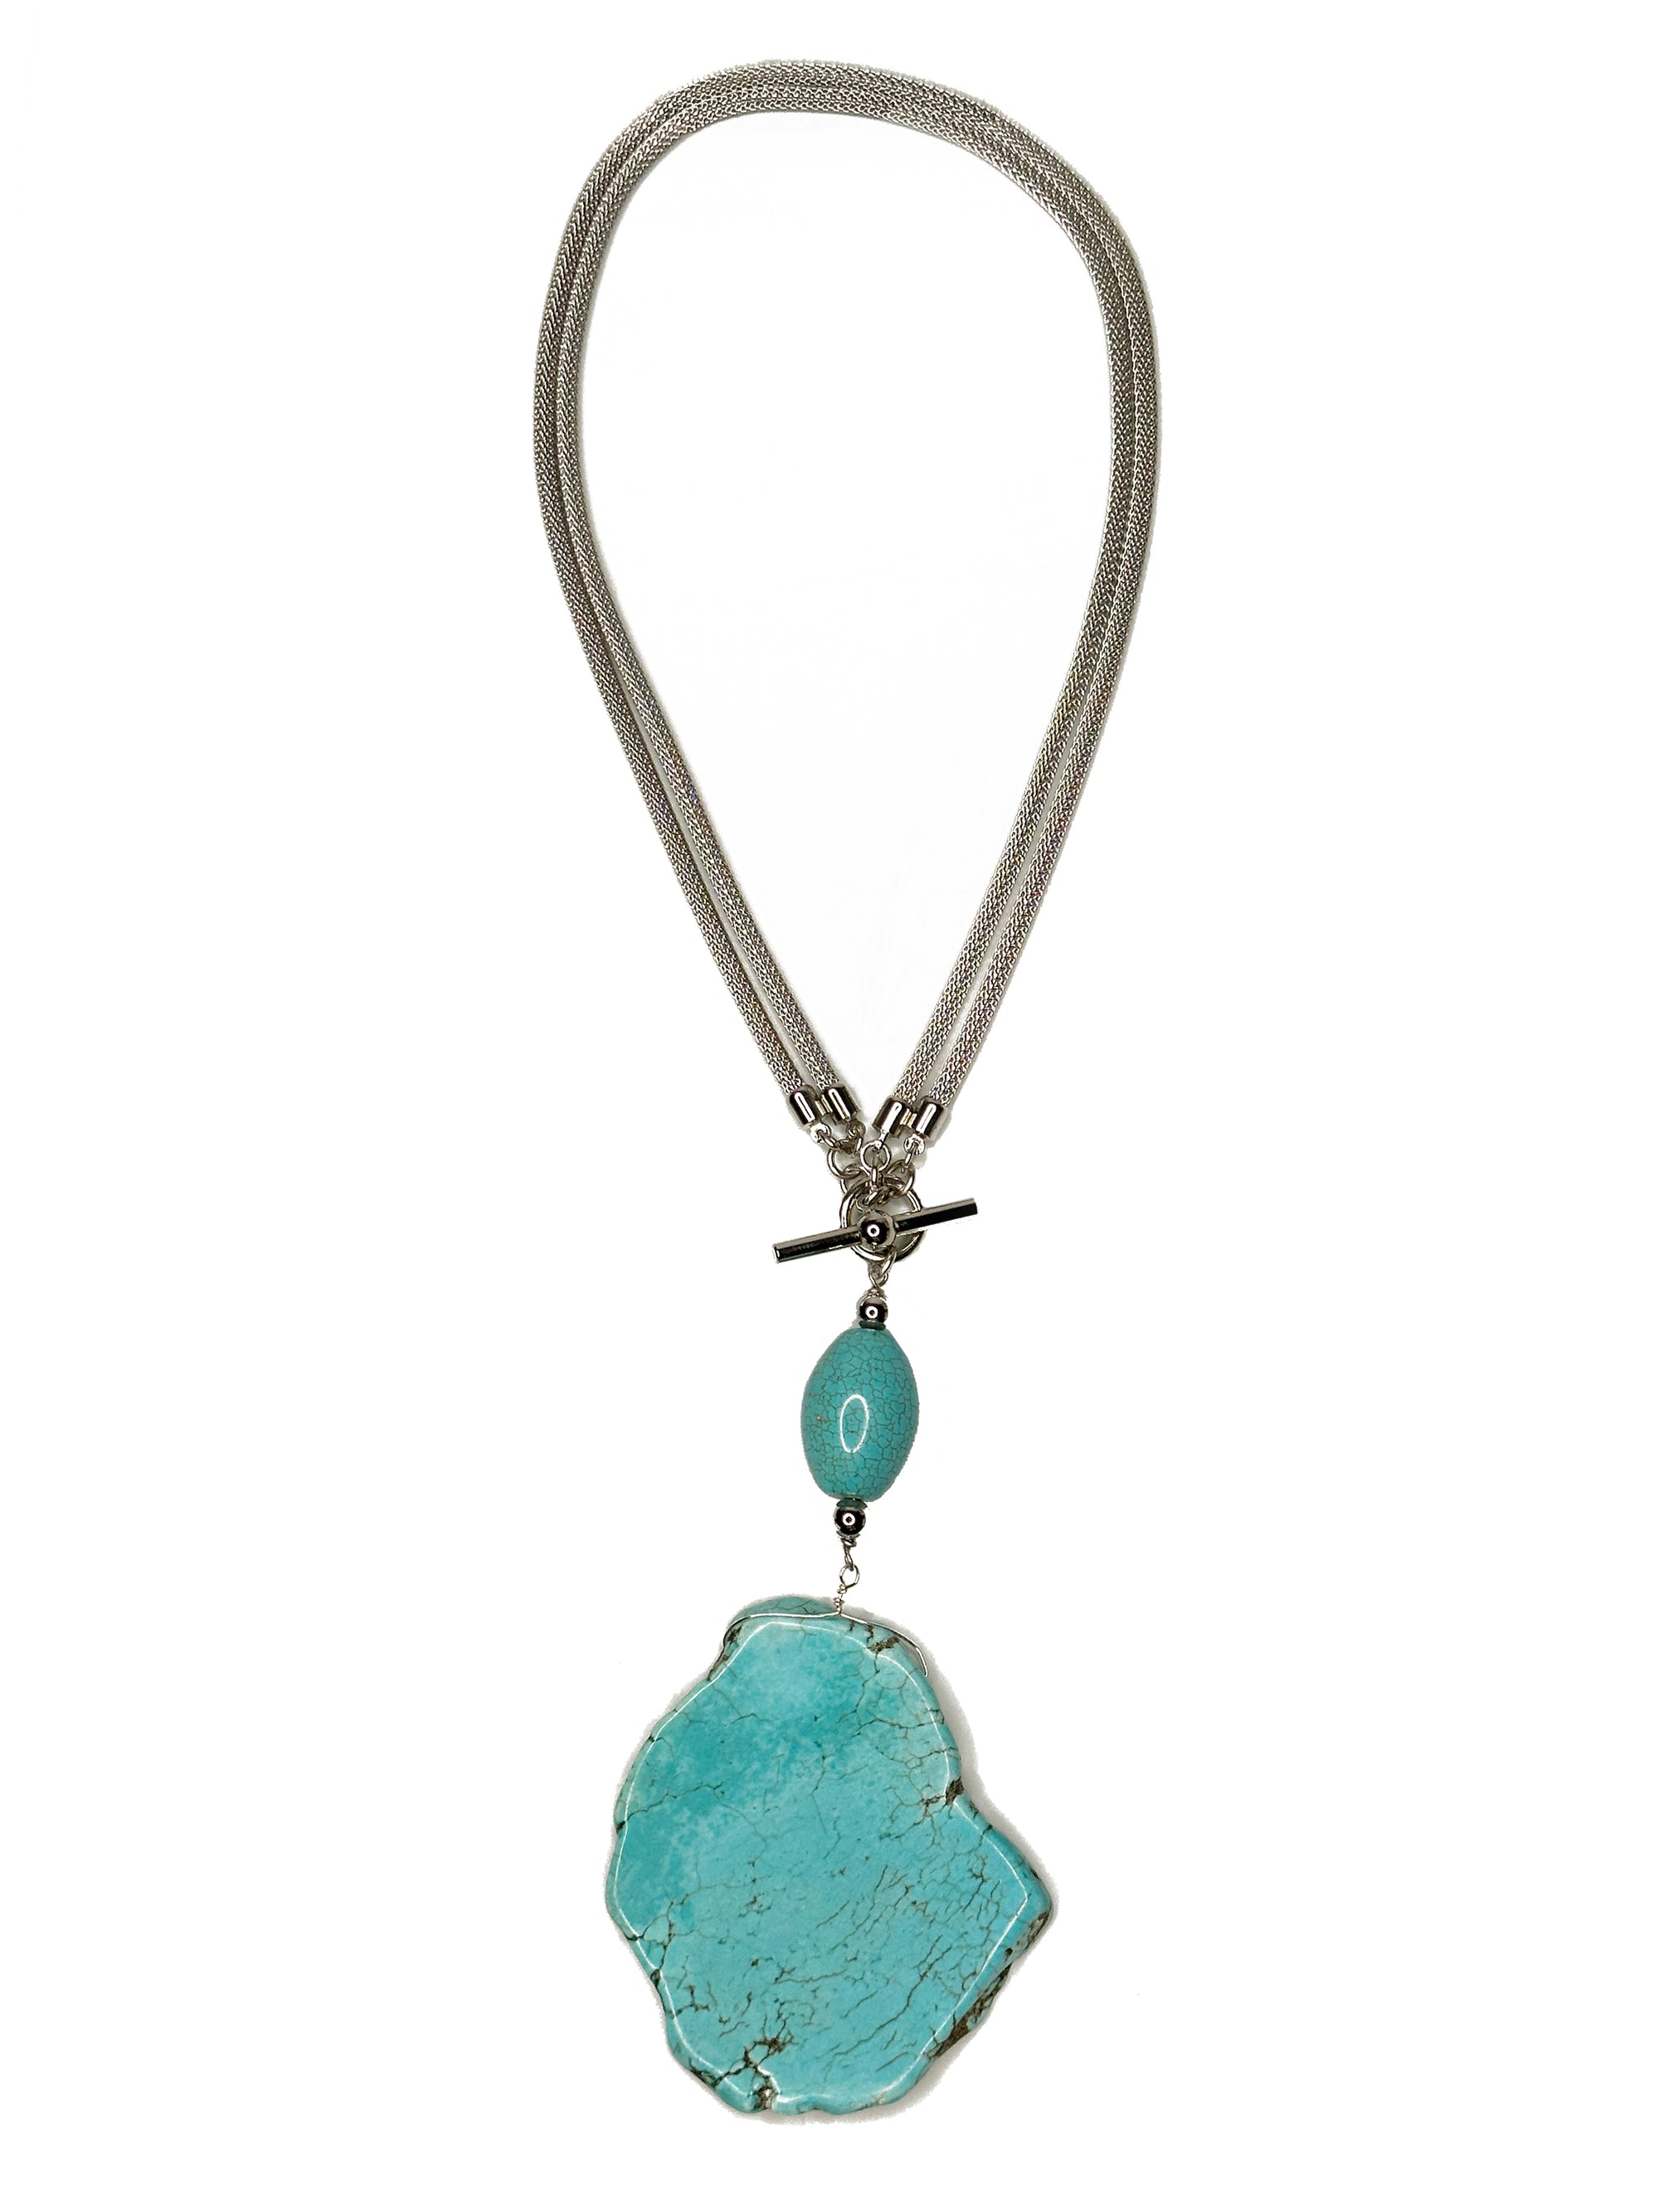 2-Way Mesh Necklace with Howlite Stone Slab